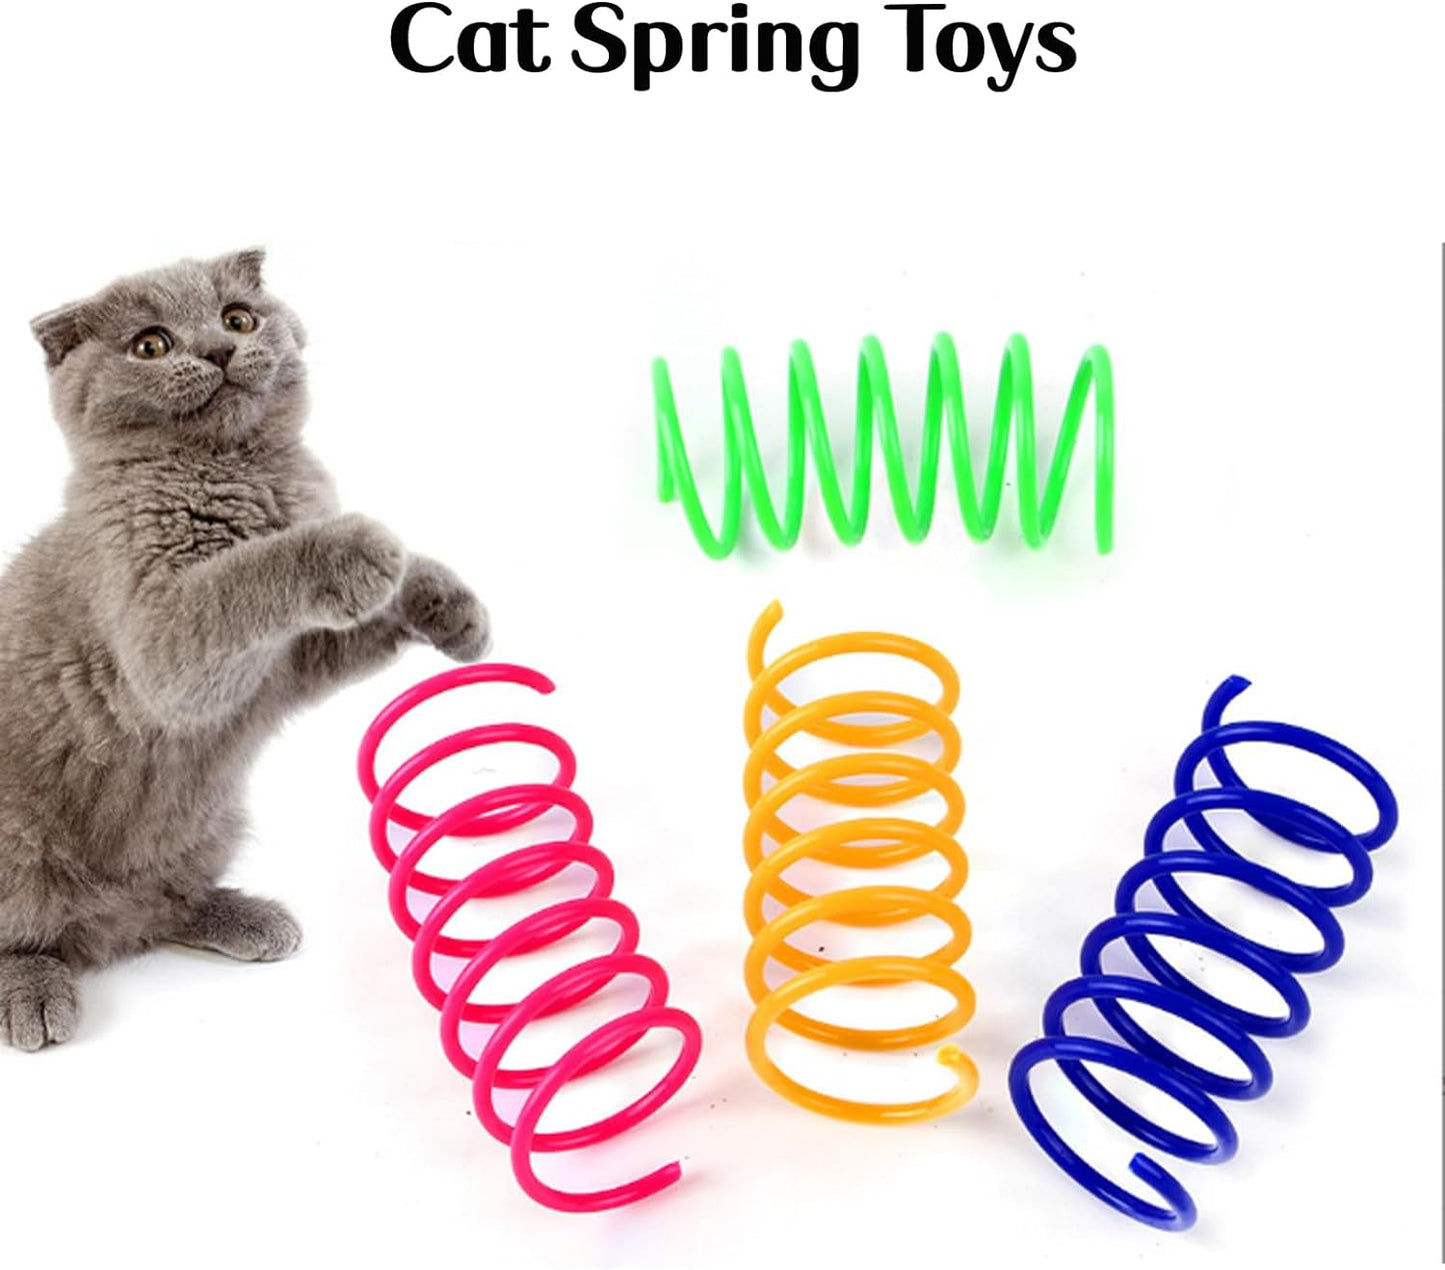 25 PCS Assortment of Cat Toys-Hanging Door Cat Toy, Catnip Toys,Feather Teaser, Mice, Colorful Balls & Bells. Perfect for Kittens, Cats, and Puppies!